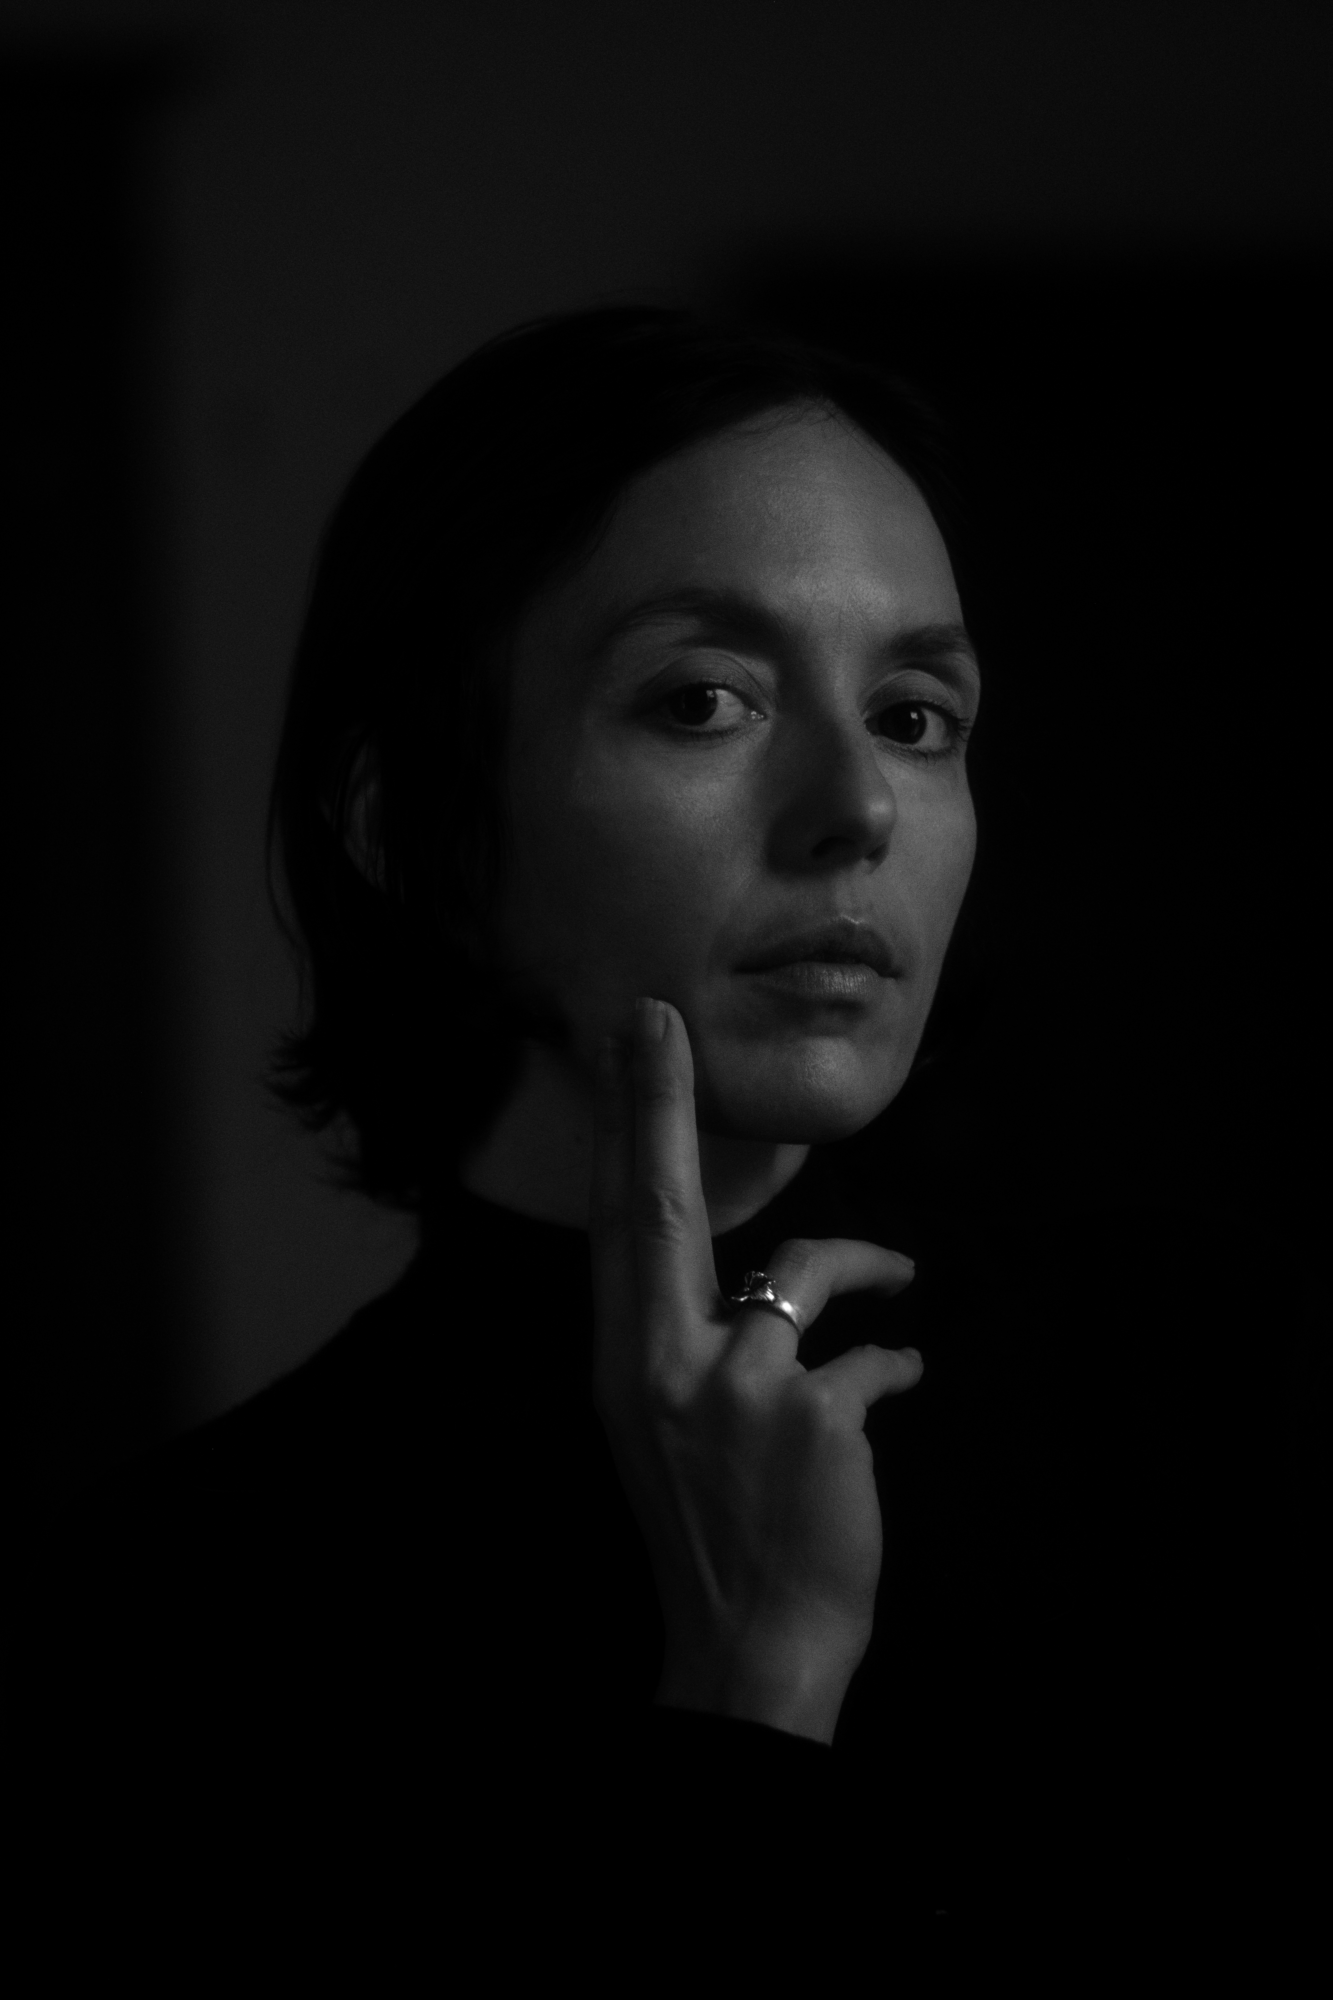 A portrait of the filmmaker, Zia Anger. Anger is shown in a dramatic, black-and-white pose, gazing at the viewer. Angers right middle finger is pressed to her chin.